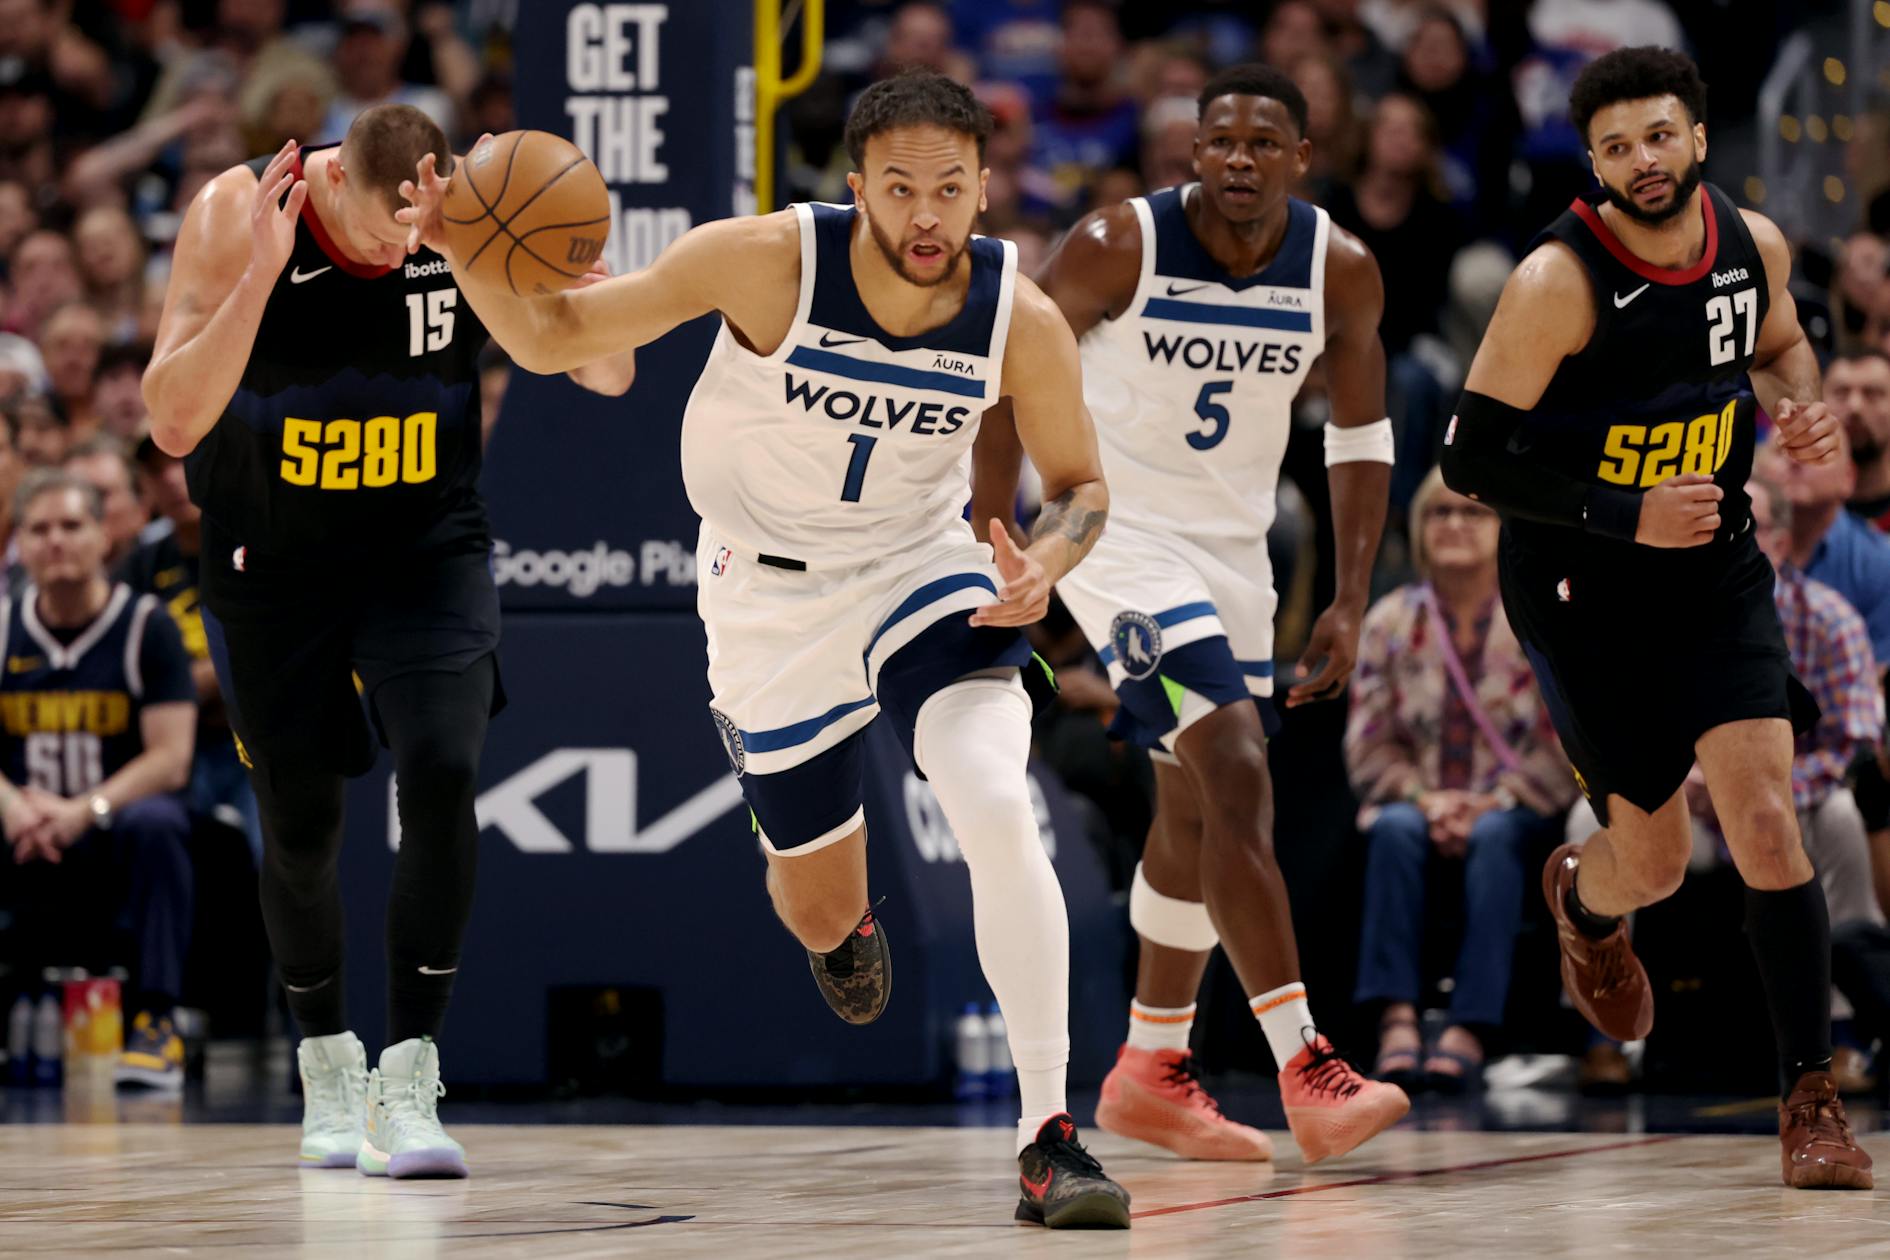 Timberwolves transfer Kyle Anderson to Golden State Warriors in a sign-and-trade deal